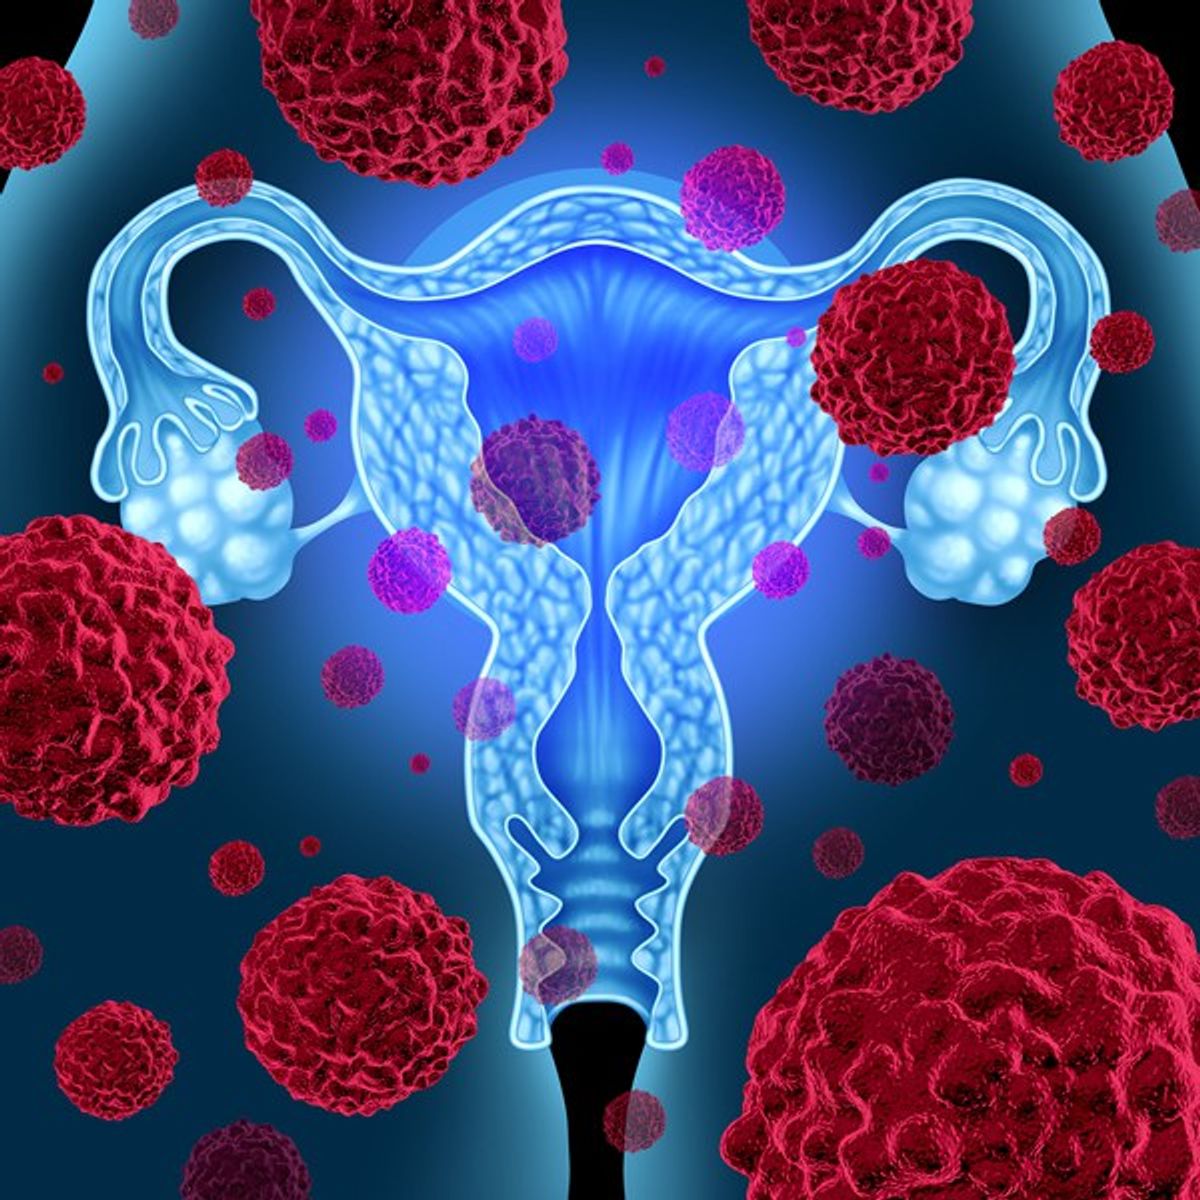 Female Reproductive Disorders: A Threat To My Womanhood?